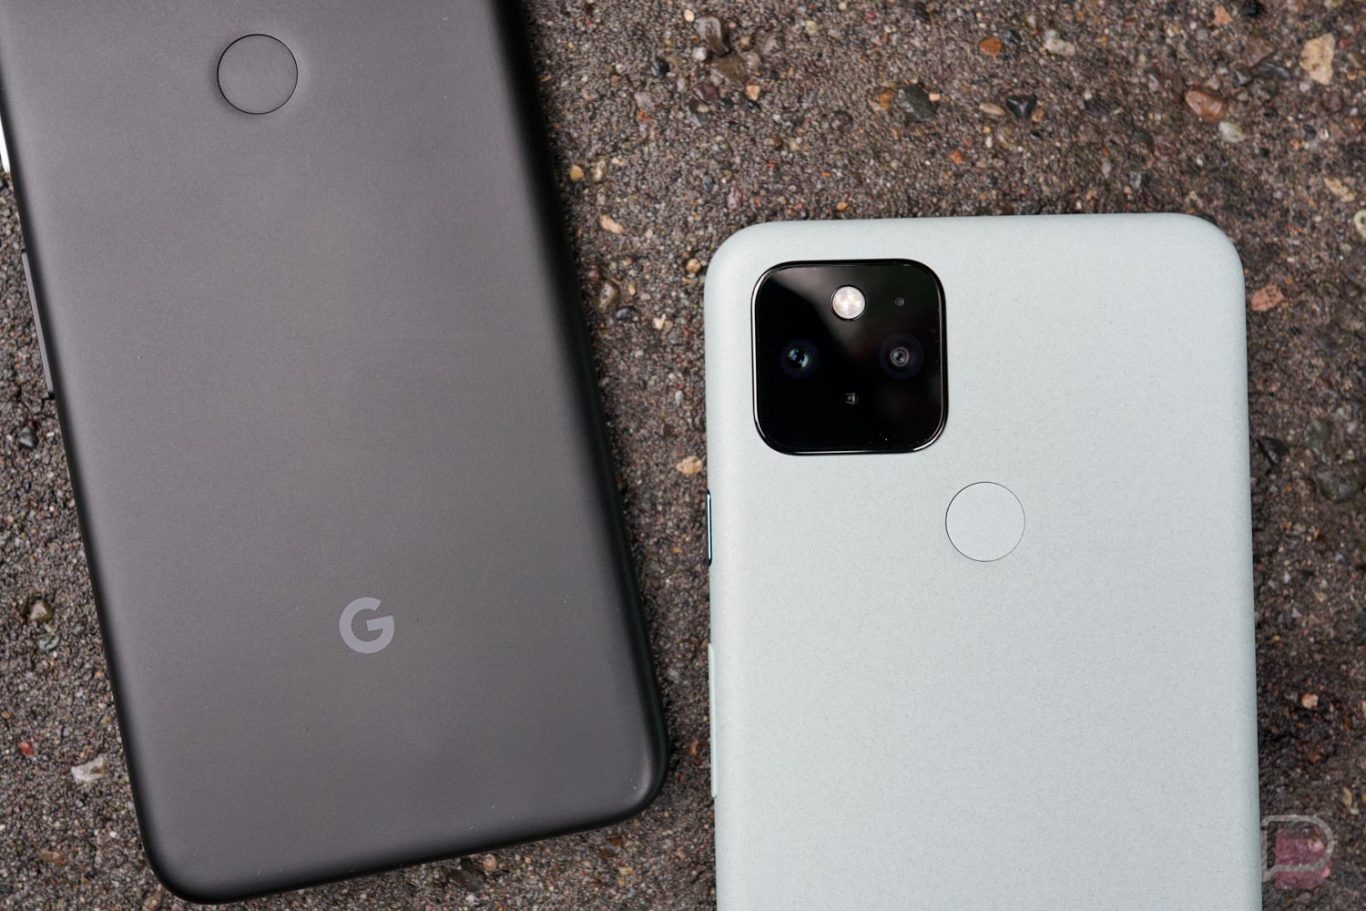 We Have a Pixel 5 and Pixel 4a 5G: Got Any Questions?